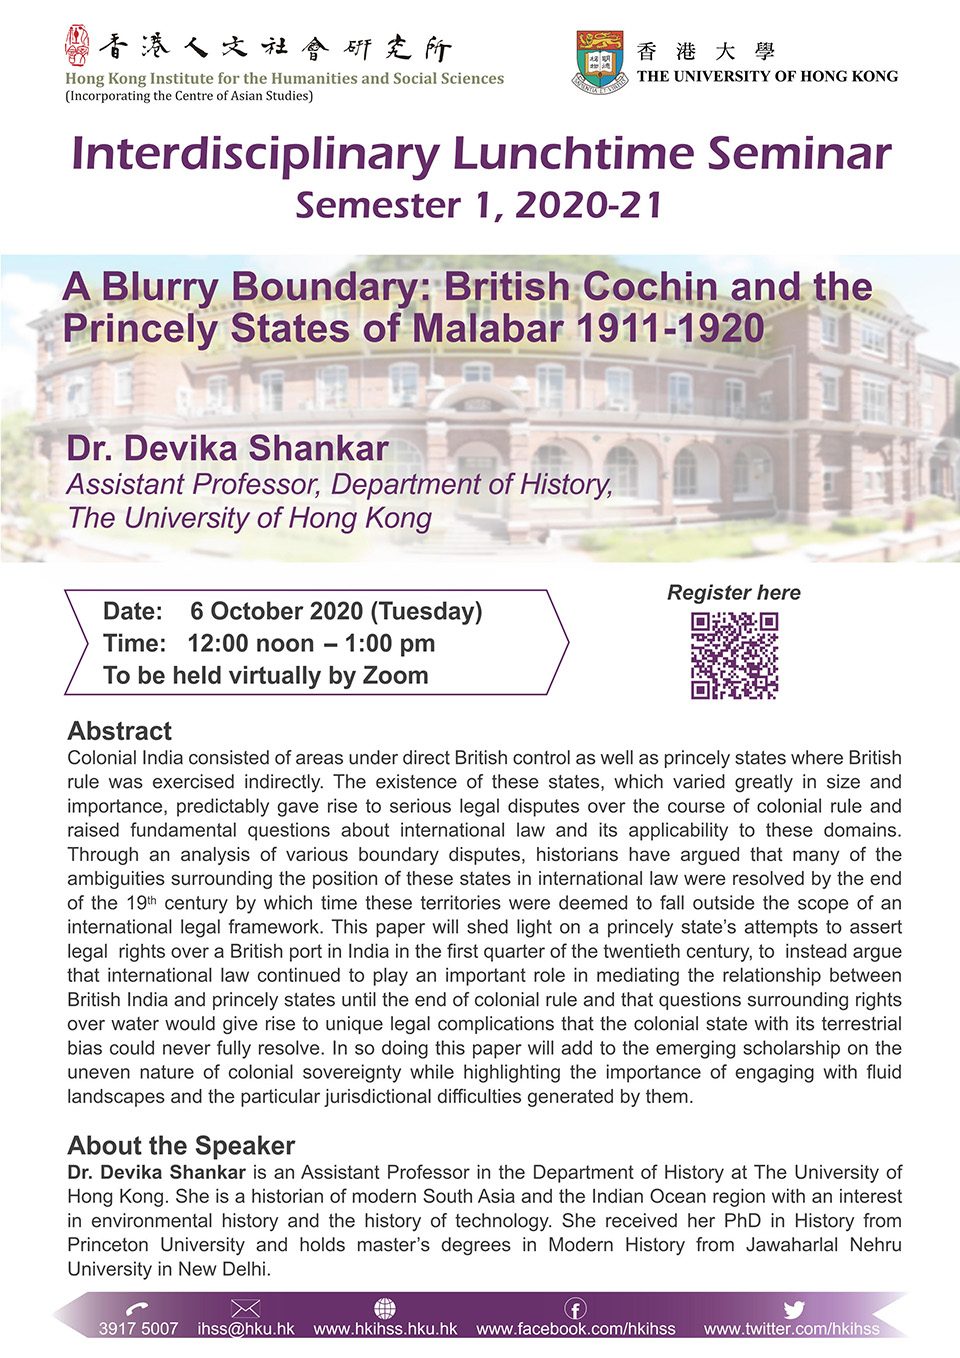 Interdisciplinary Lunchtime Seminar on “A Blurry Boundary: British Cochin and the Princely States of Malabar 1911 – 1920” by Dr. Devika Shankar (October 6, 2020)